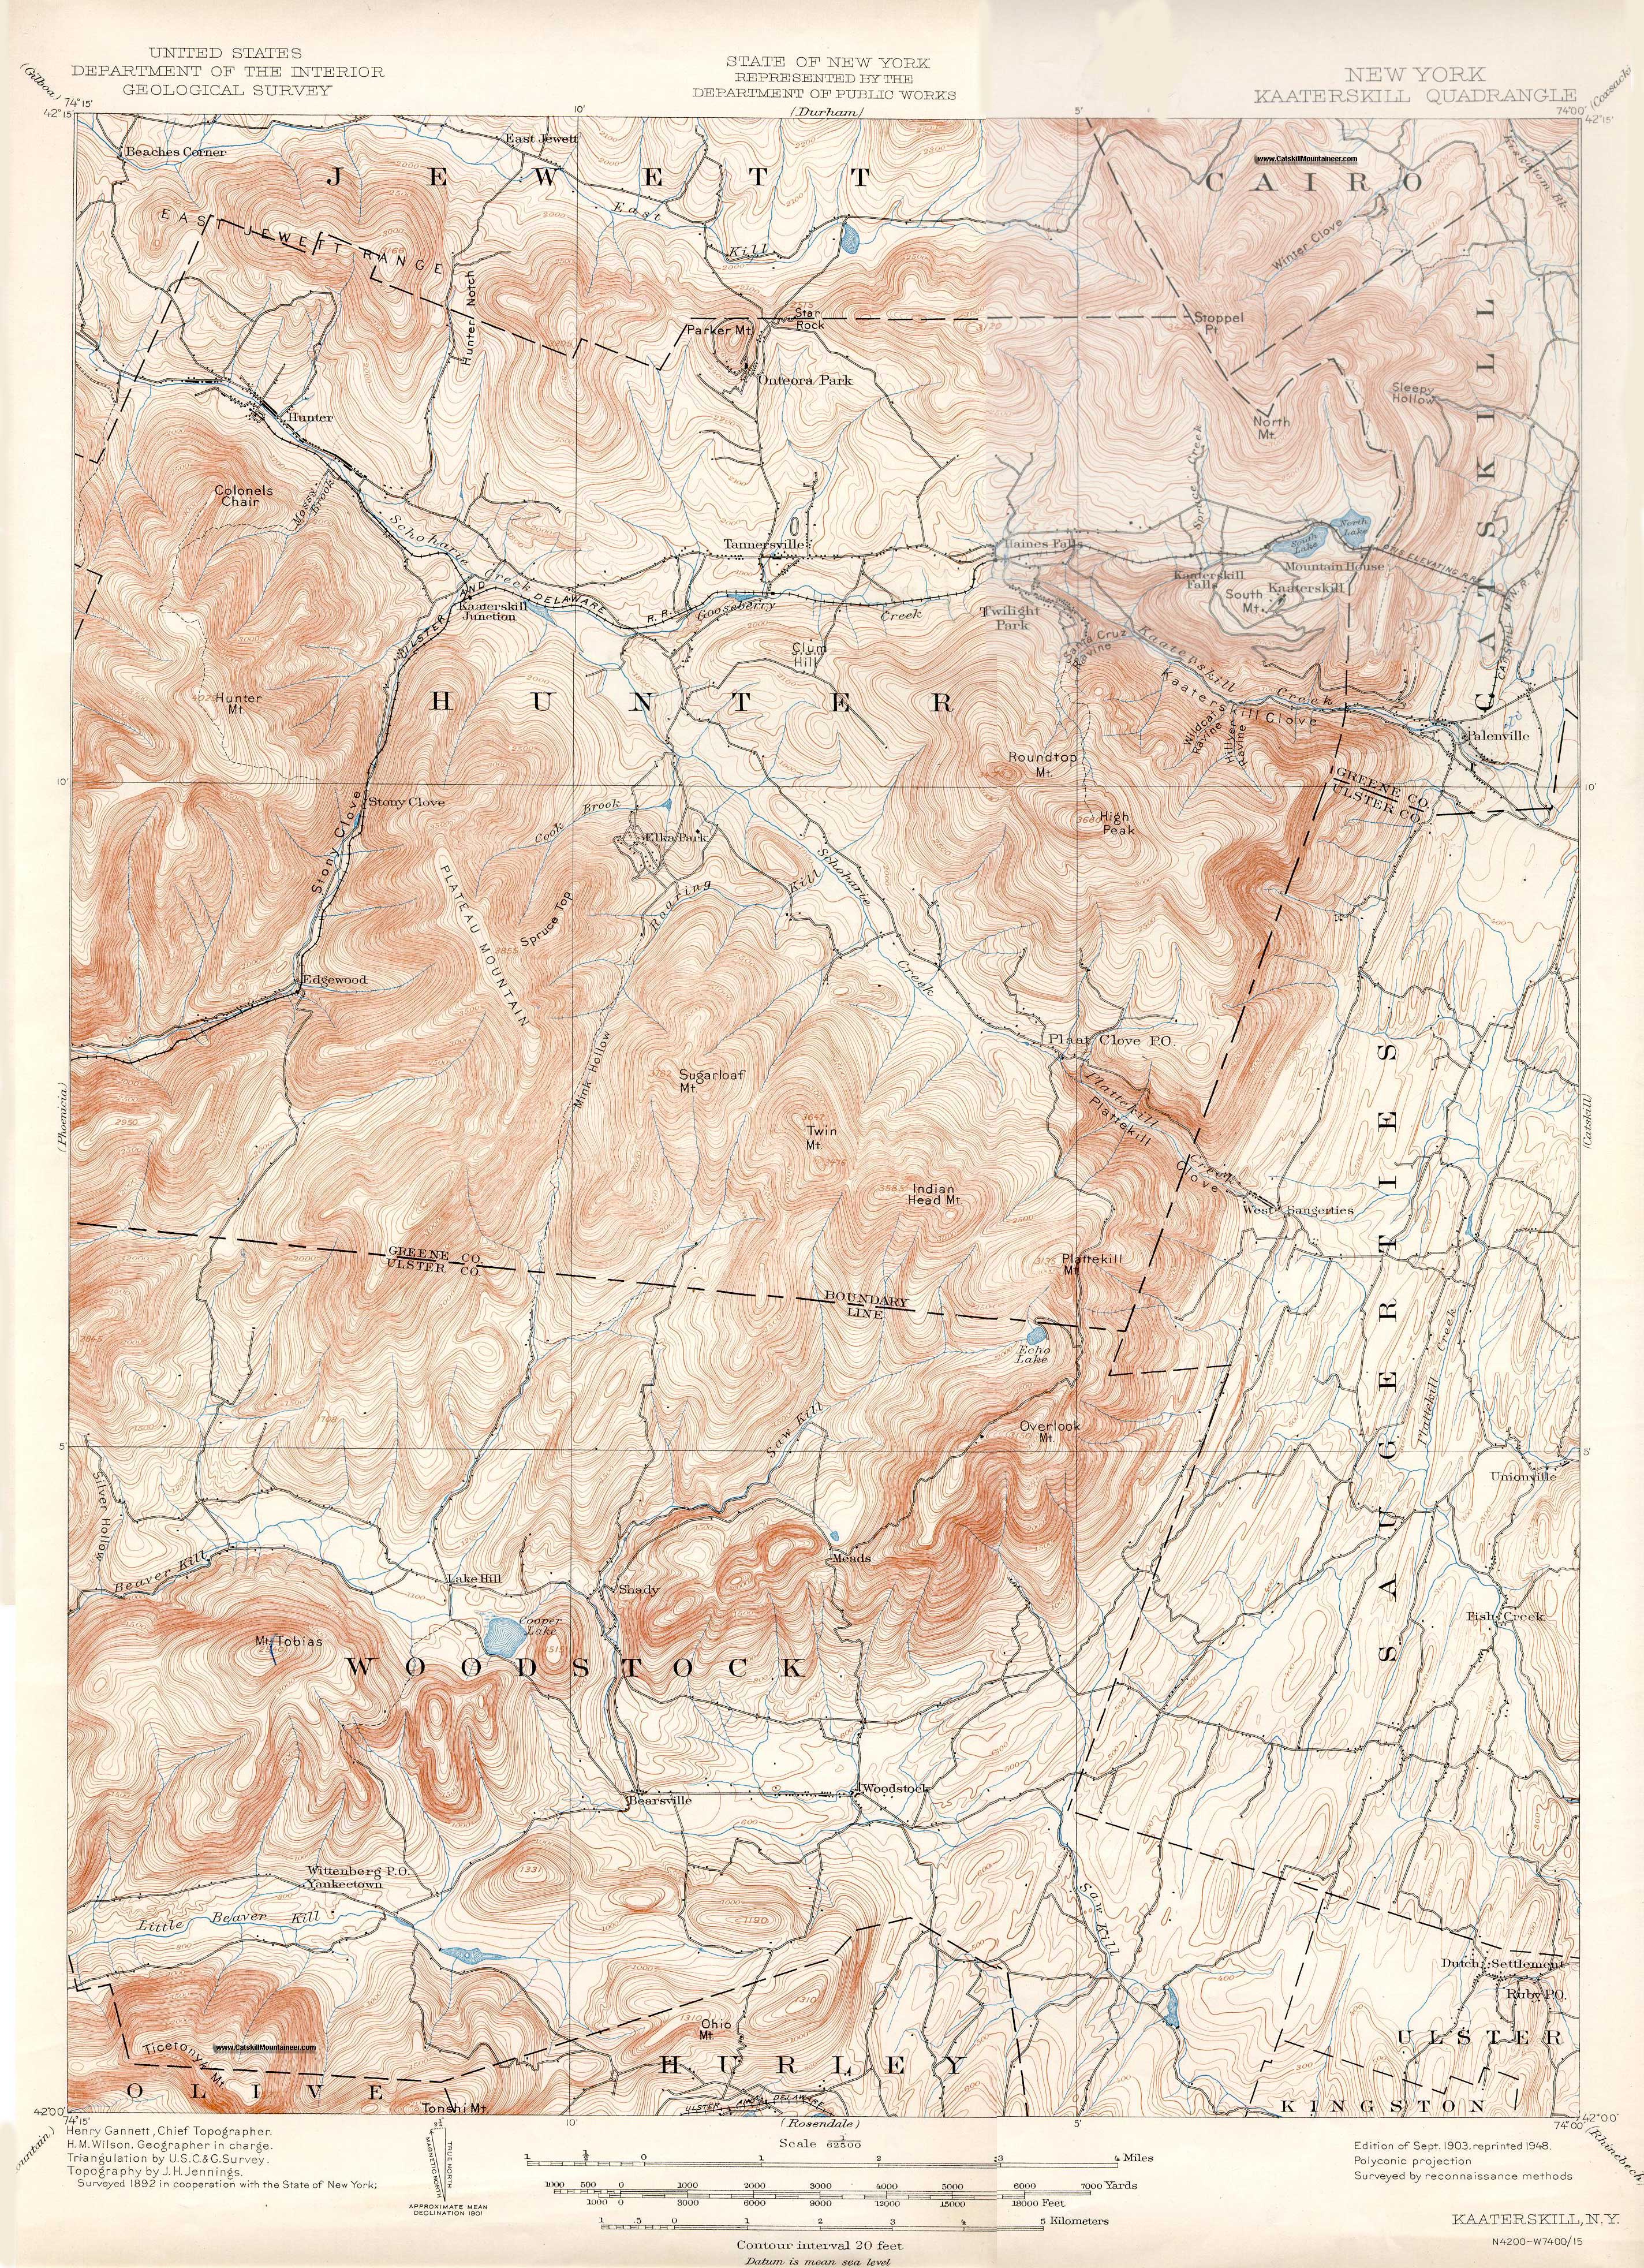 1903 USGS topographical map of Hunter